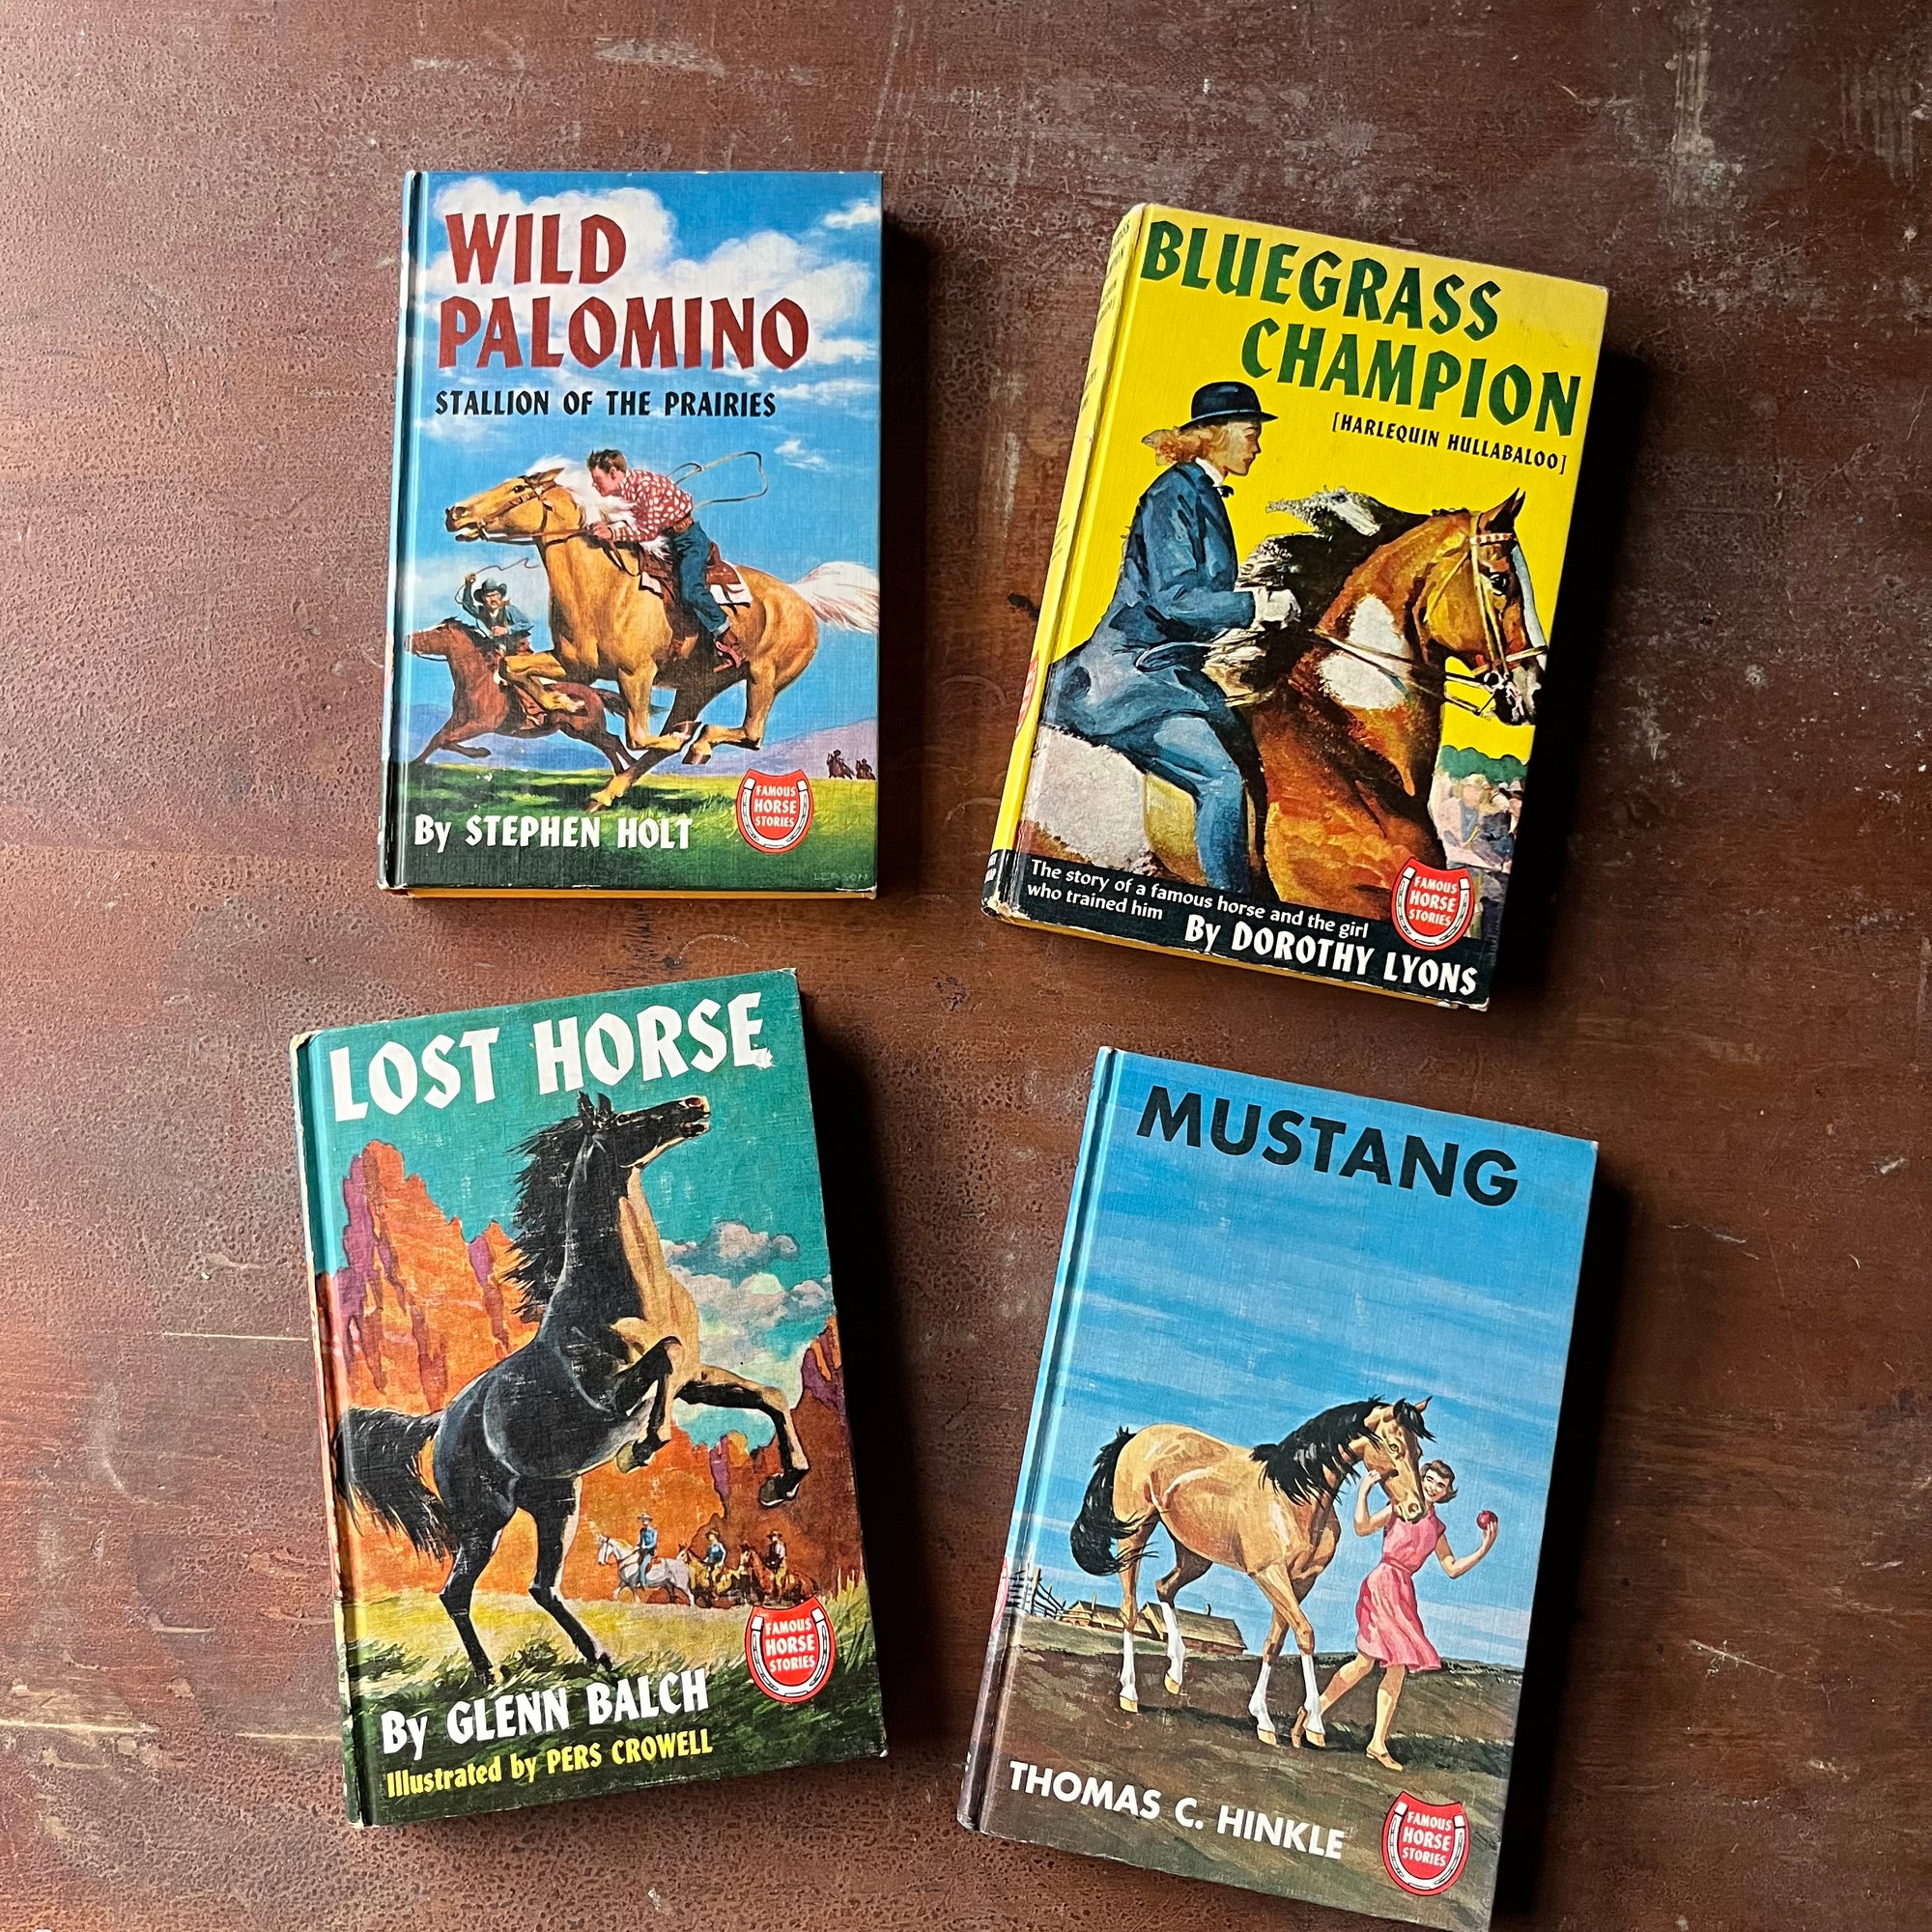 Set of Four Famous Horse Story Books-Mustang, Wild Palomino, Bleugrass Champion & Lost Horse-vintage children's chapter books-view of the colorful front covers in bright blues & yellows all with illustrations of the horse the book features plus the title, author & the Famous Horse Stories Emblem which is red & white with a horseshoe 